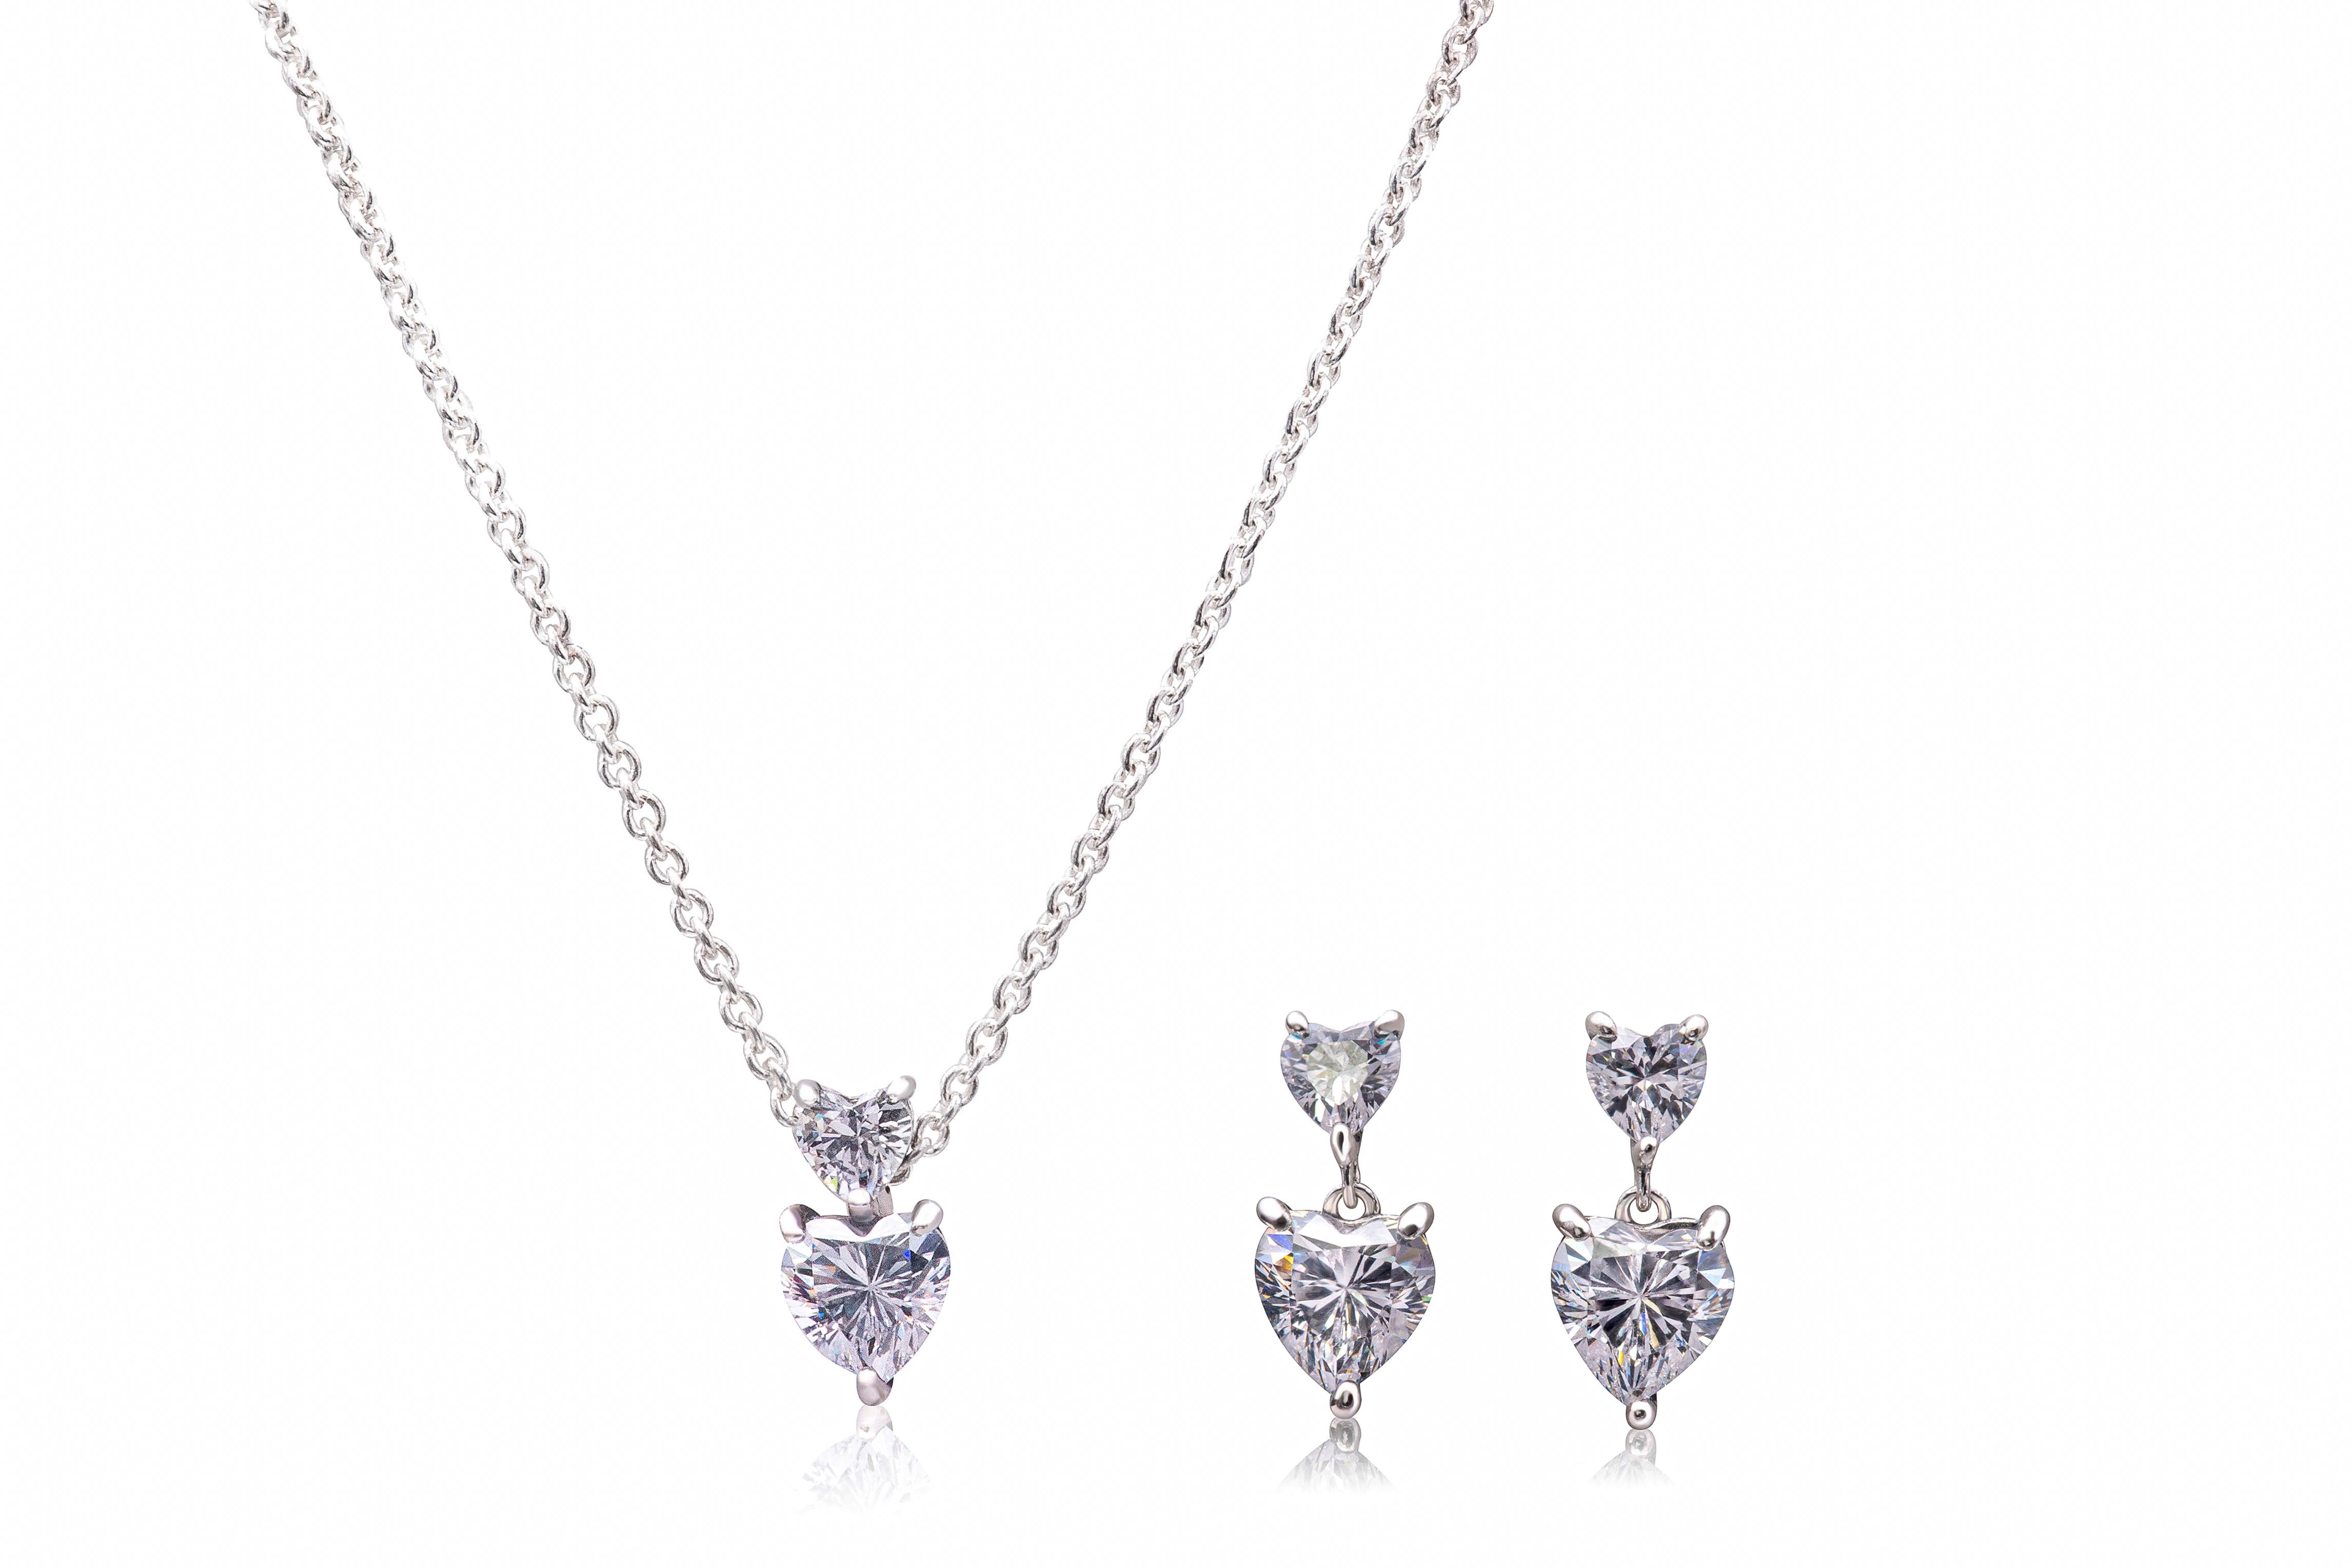 Pandora Radiant Heart and Floating Gem Necklace. talla 45